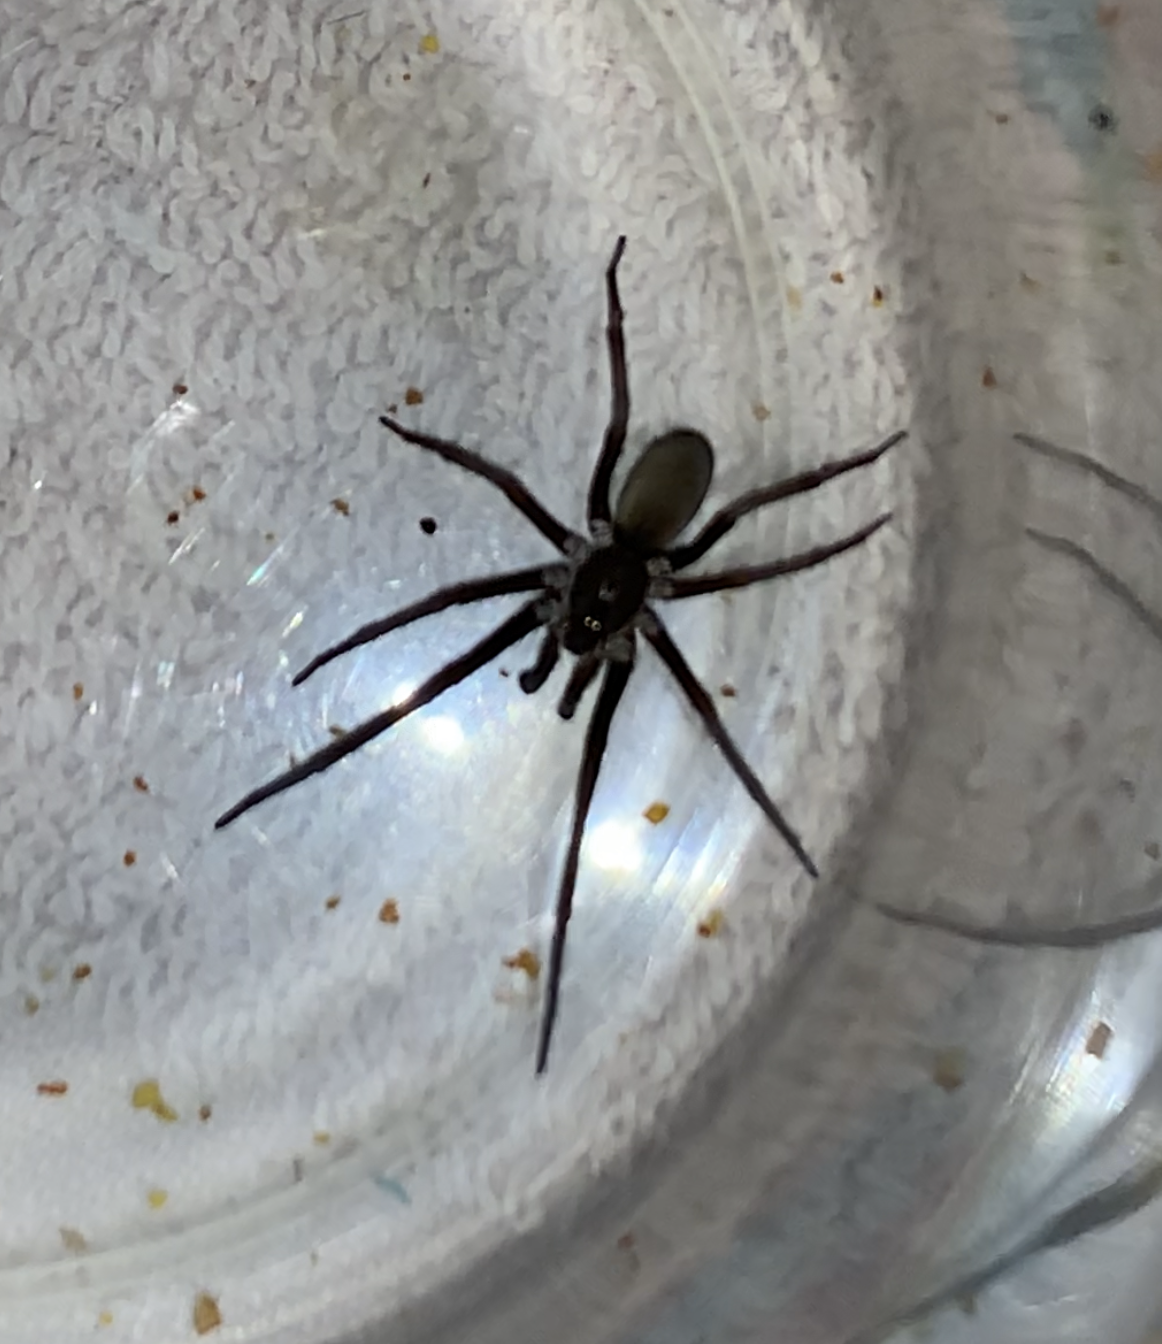 Picture of Kukulcania hibernalis (Southern House Spider) - Dorsal